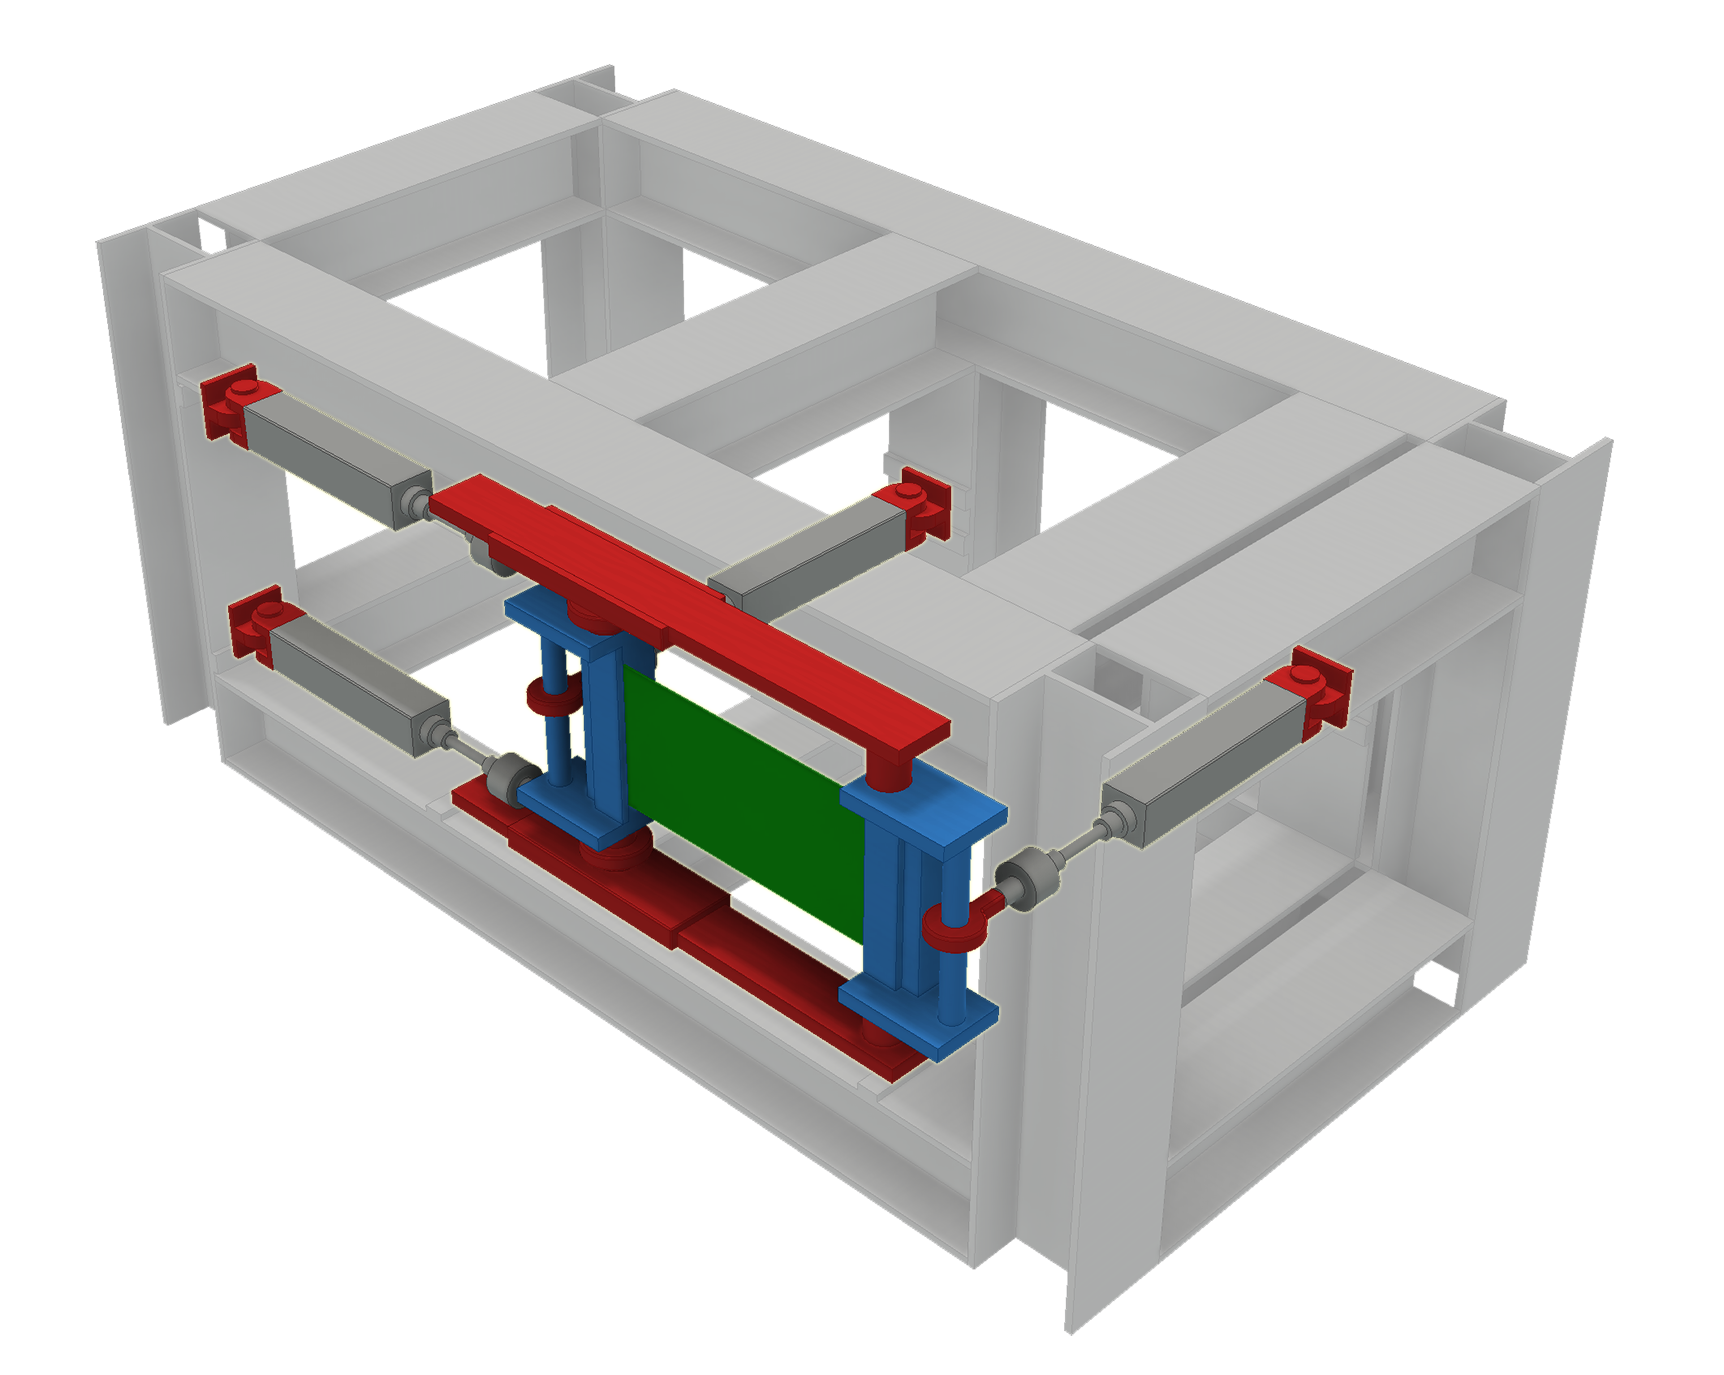 Enlarged view: Inventor mock-up of the TM-HS test rig (approx. size: 1.50x0.80x0.80m).